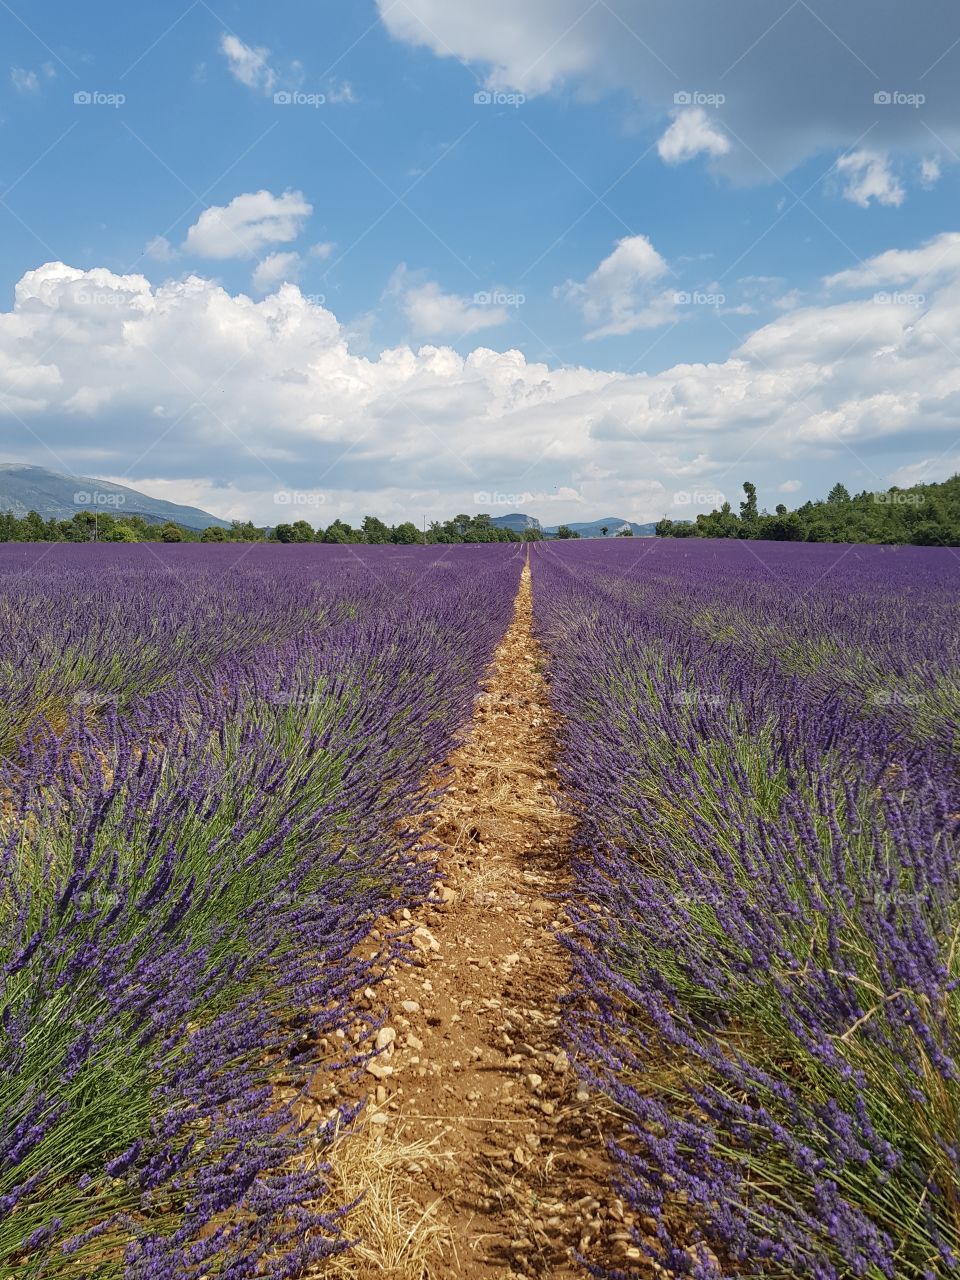 Lavender field in Valensole, France.